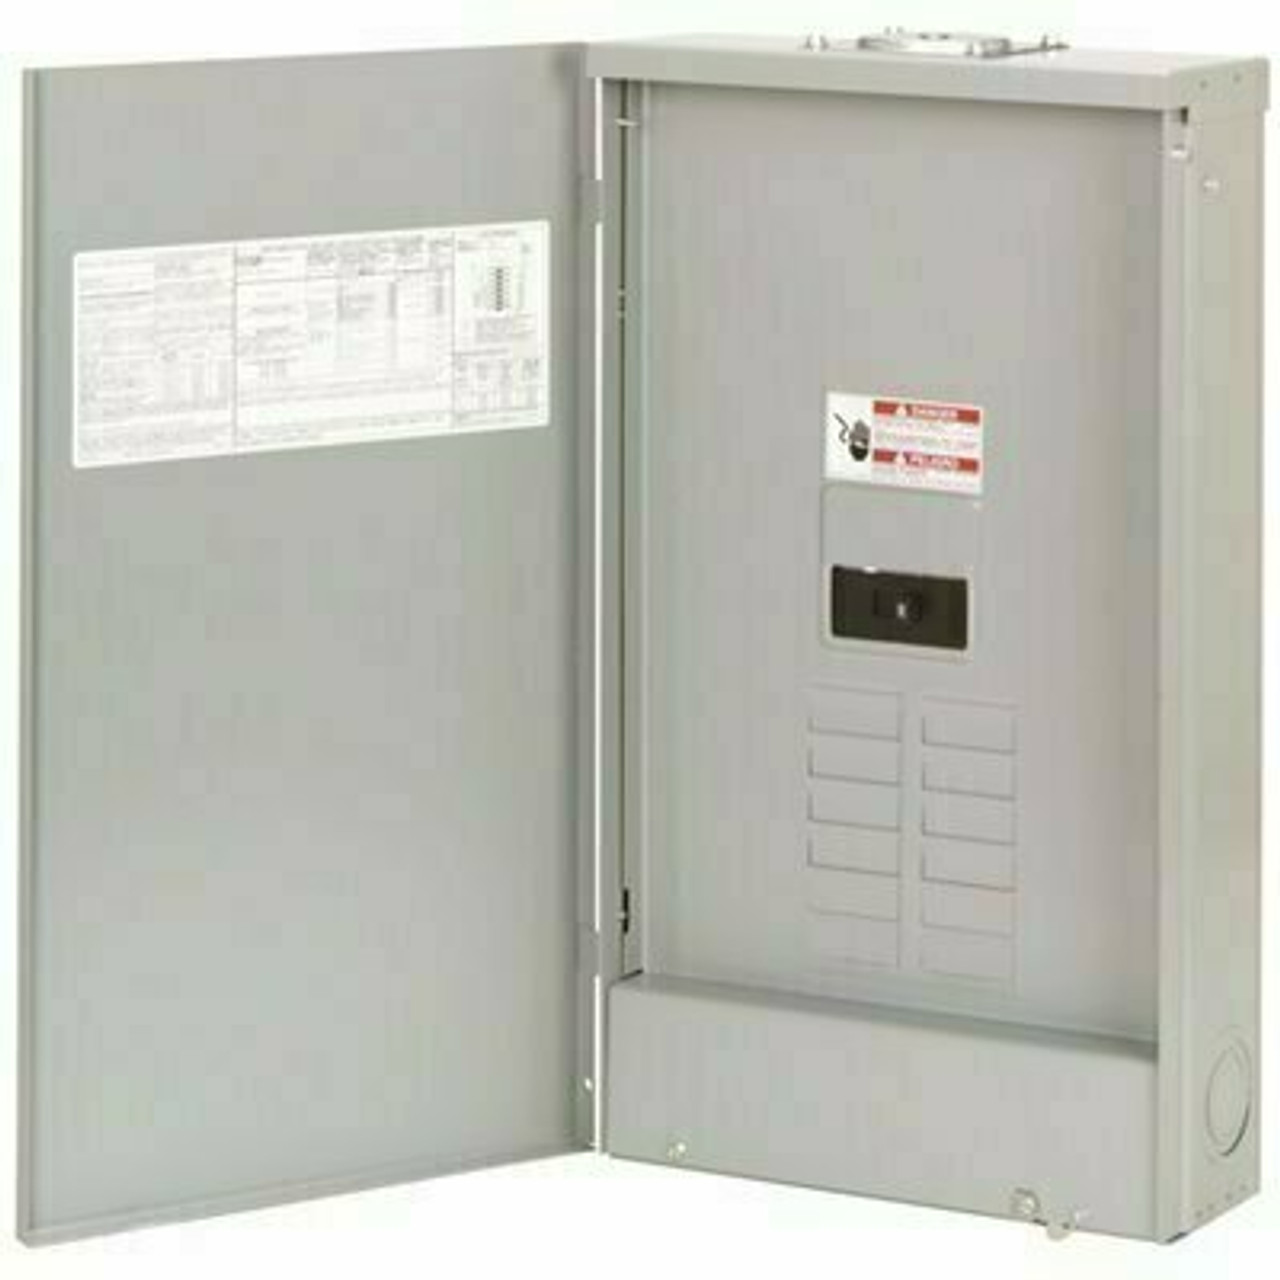 Eaton 200 Amp 16-Circuit Outdoor Main Breaker Plug-On Neutral Load Center With Flush Cover